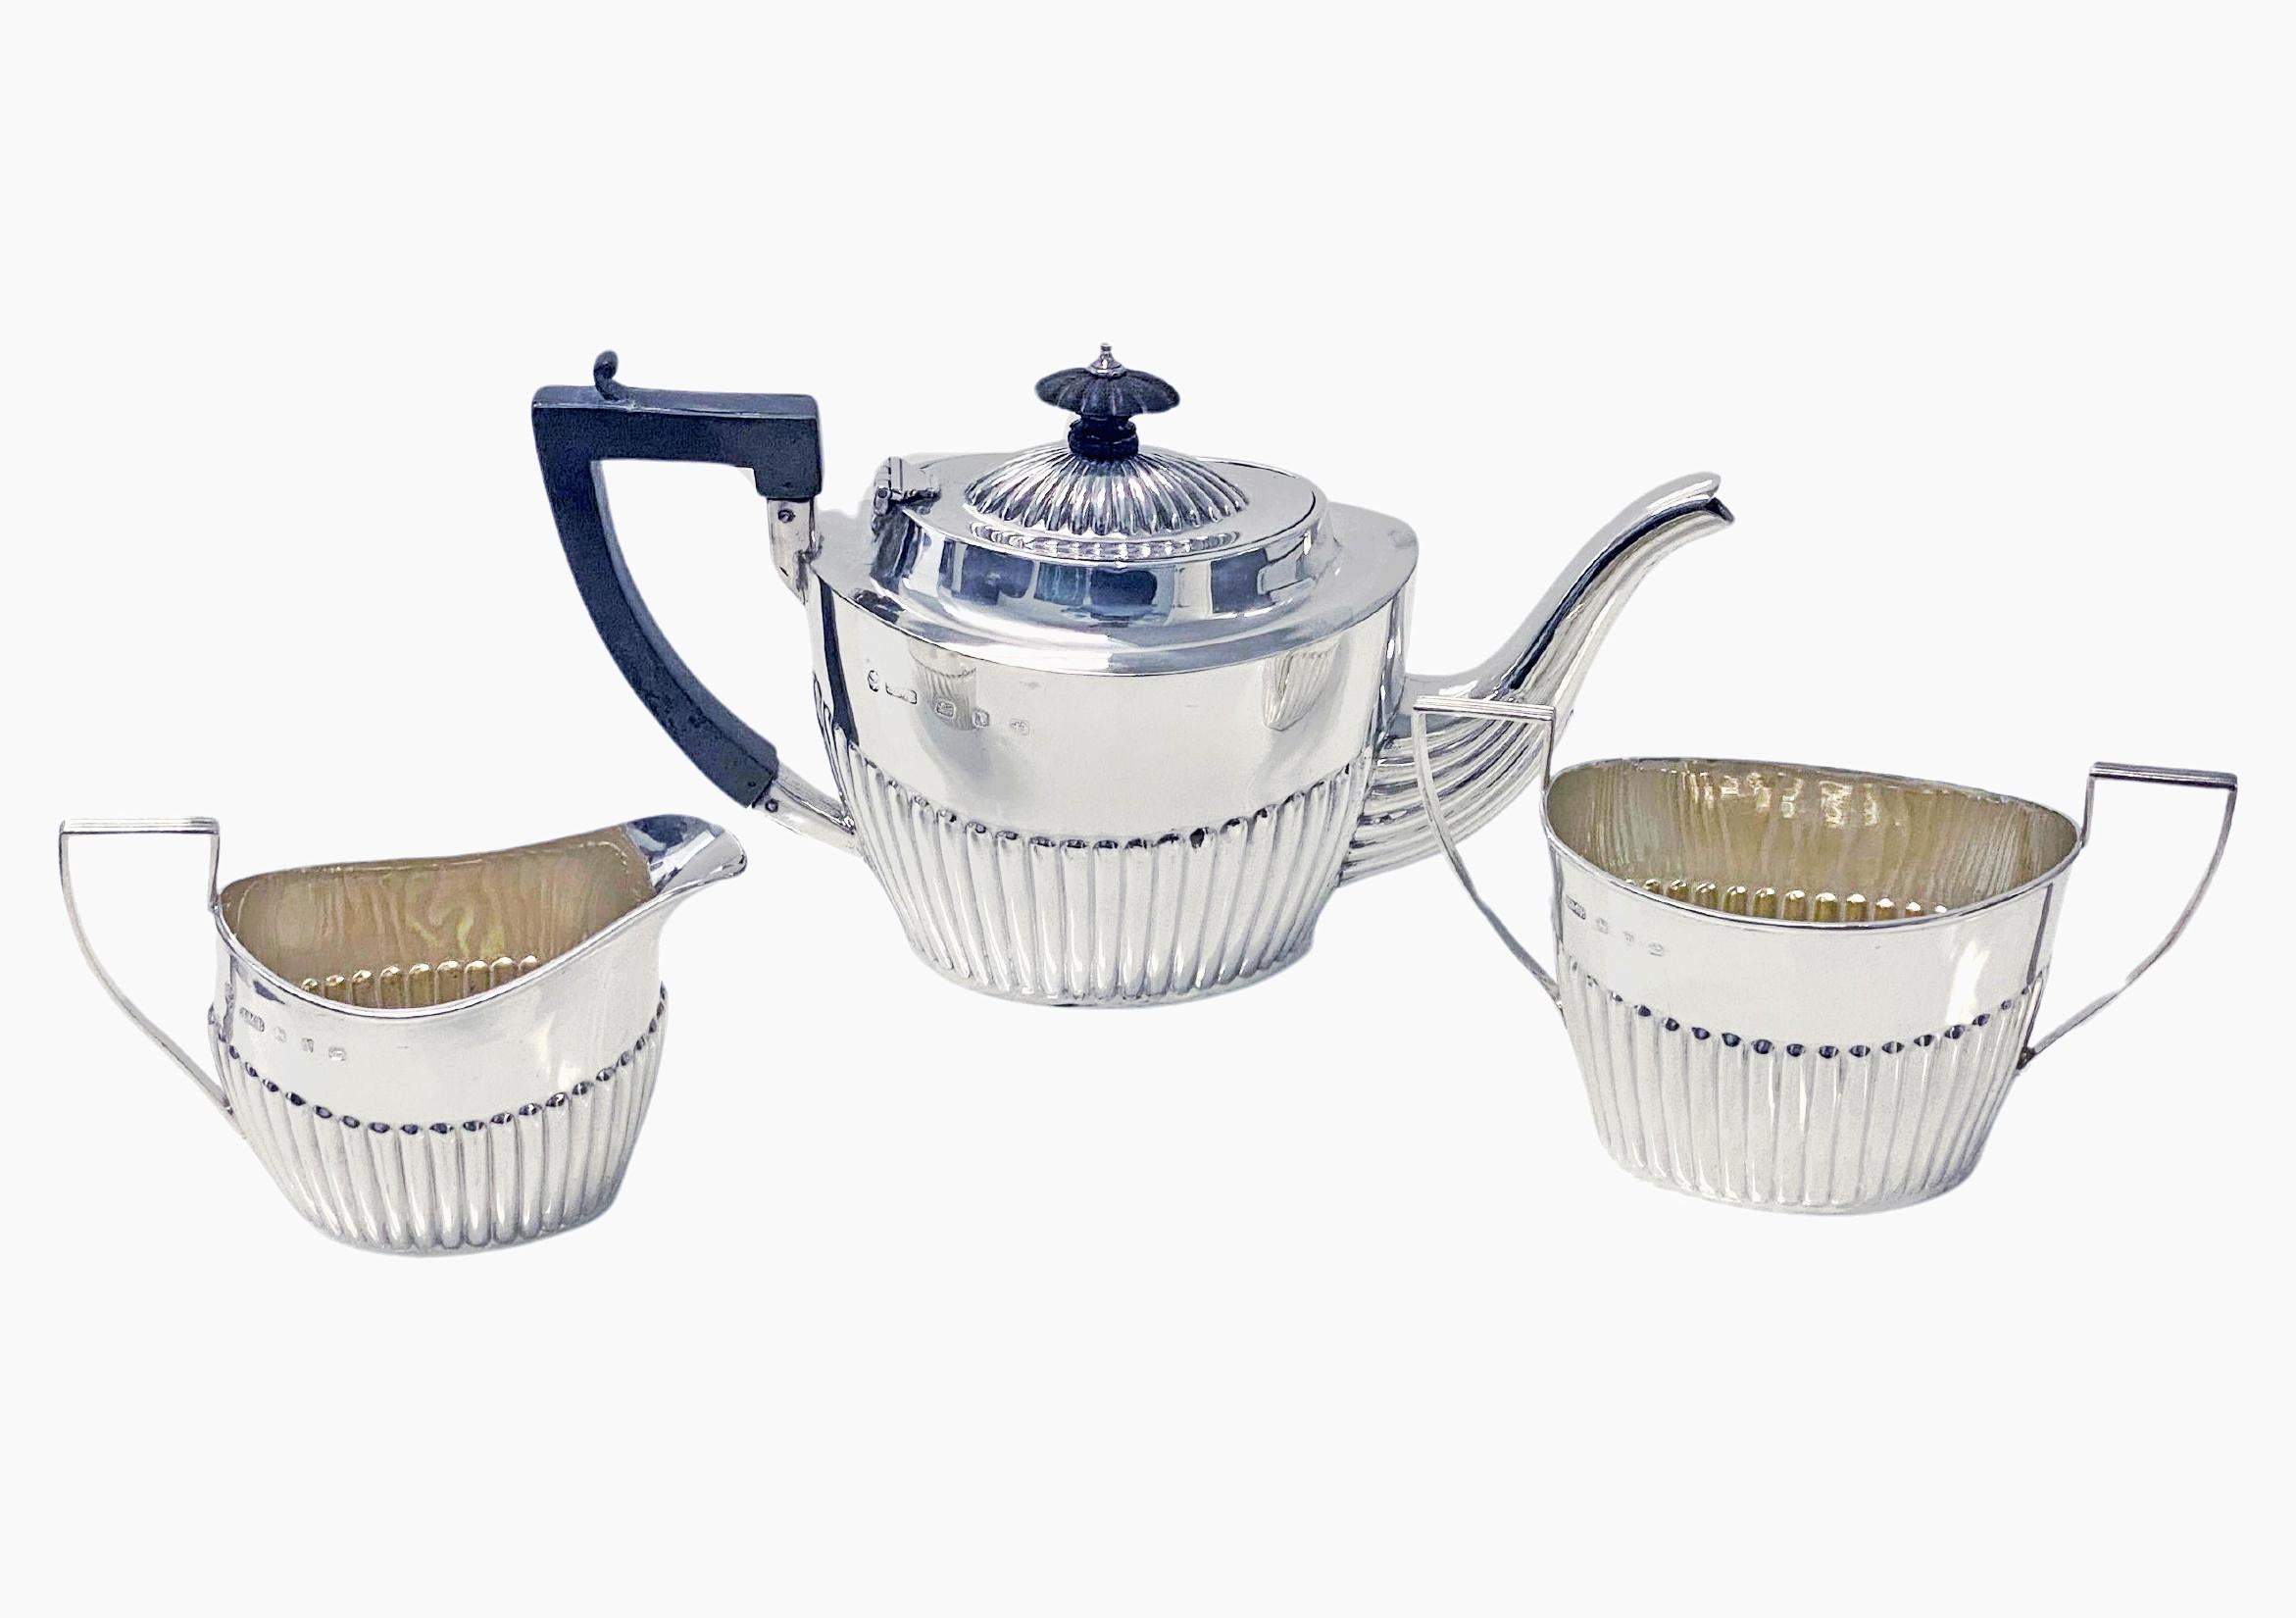 Antique English Silver three-piece Tea Set Birmingham 1896-7 John Millwood Banks retailed by Thornhill London. Comprising teapot, milk and sugar, oval part fluted, carved ebony wood handle and finial to teapot, lightly gilded interiors. Teapot: 8.50